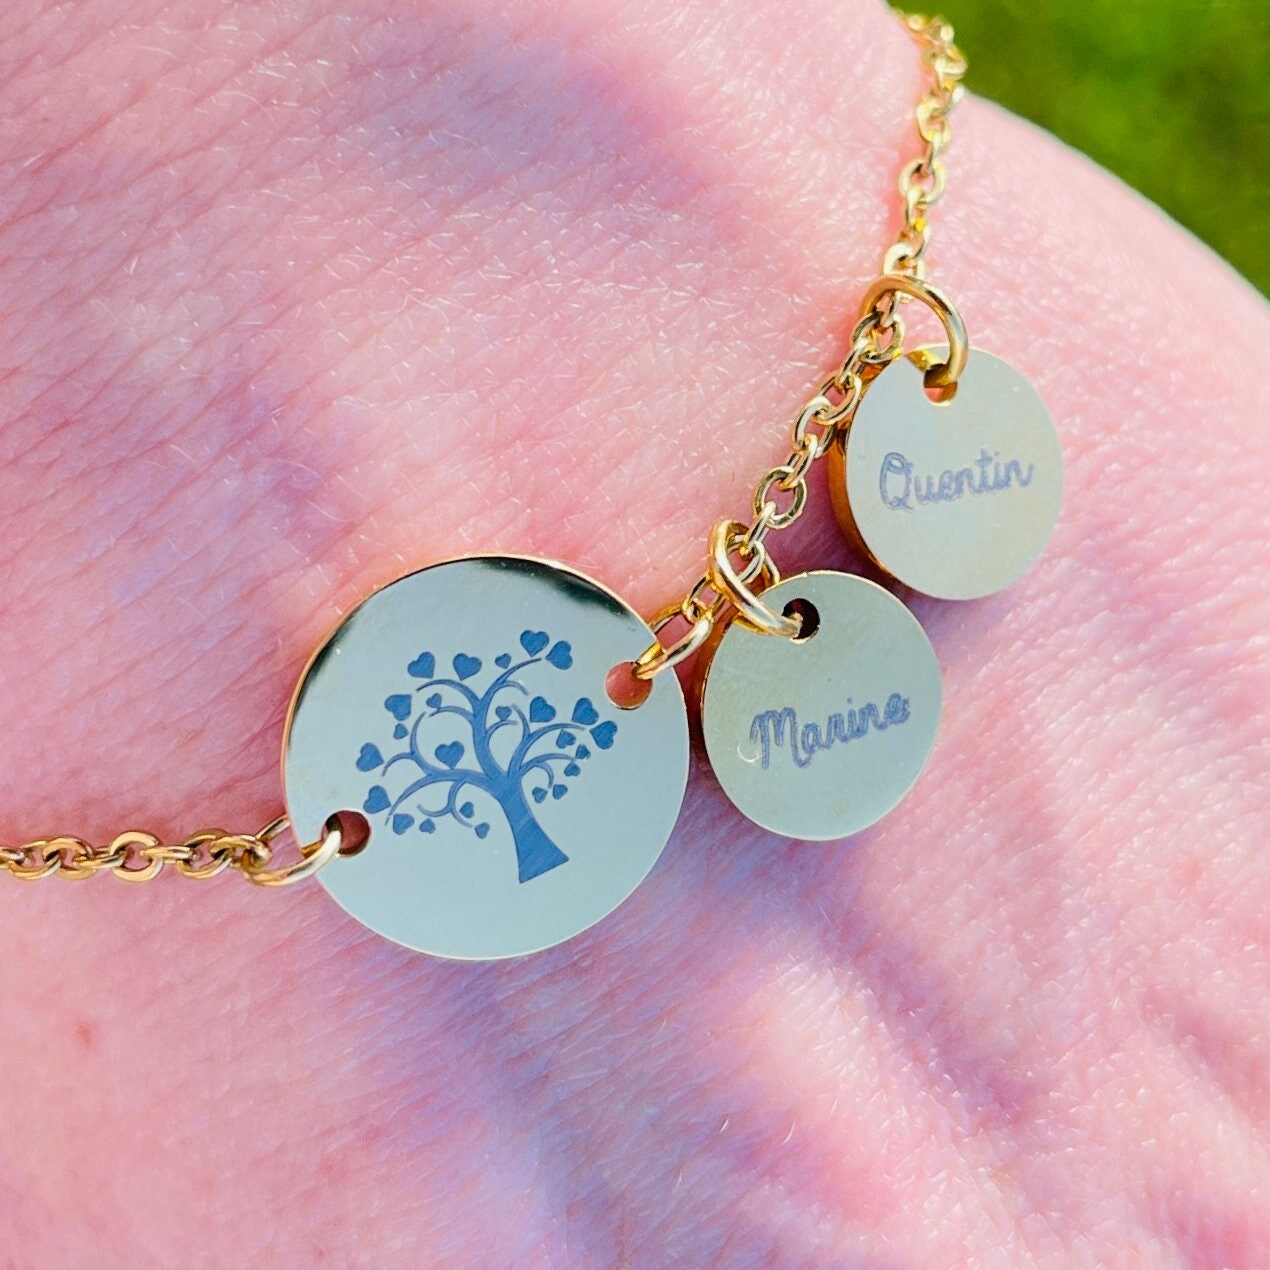 Personalized Tree of Life Bracelet and First Name Medallions - Etsy